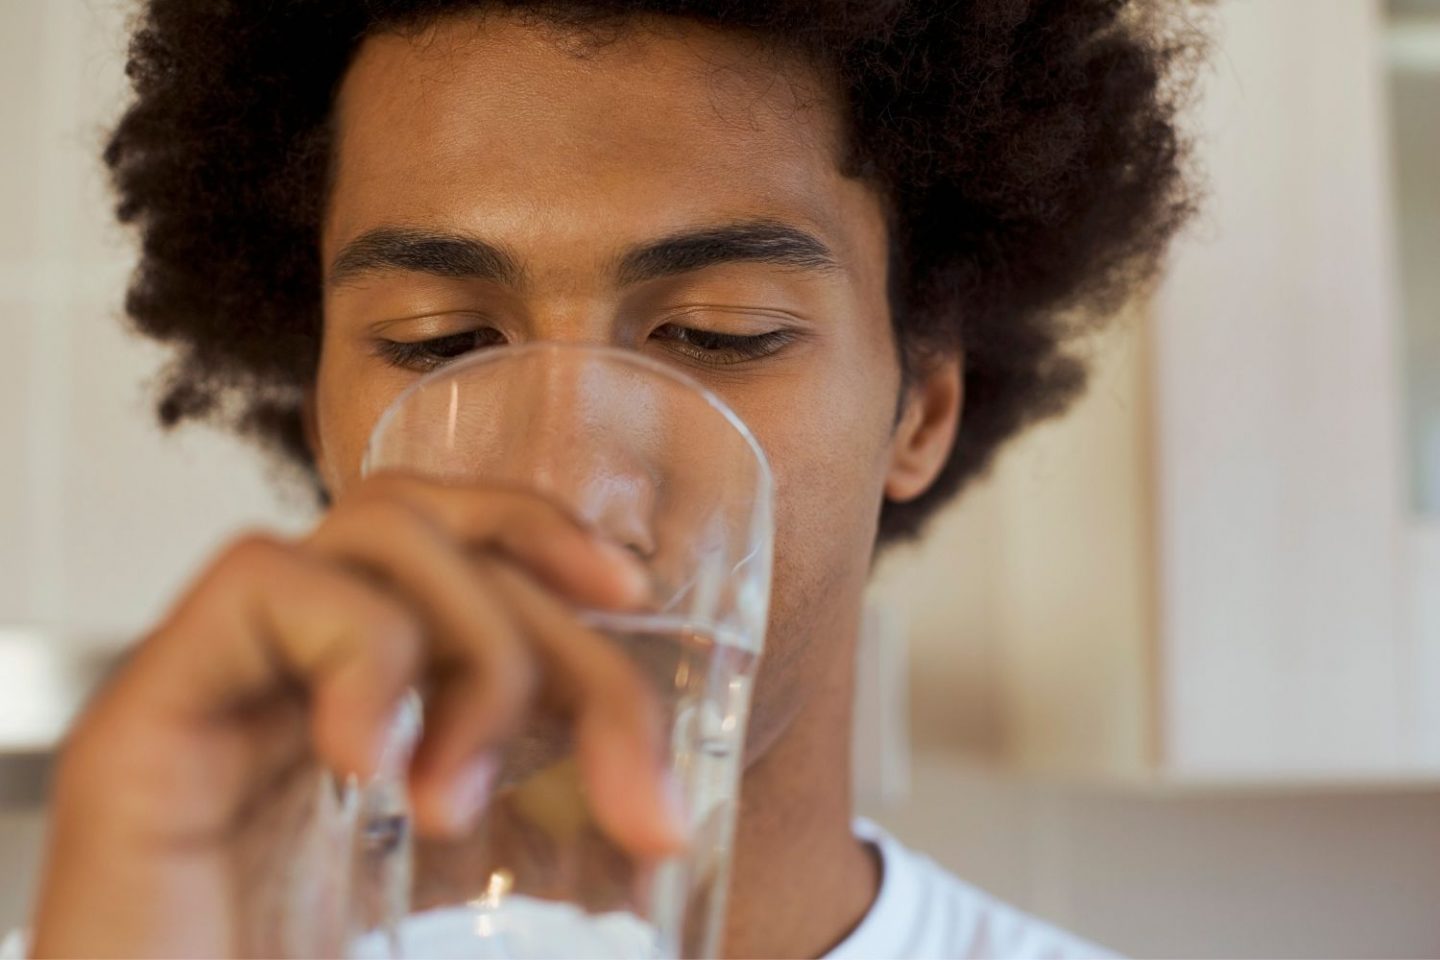 A close-up photo of a man raising a glass of water to his mouth to drink.